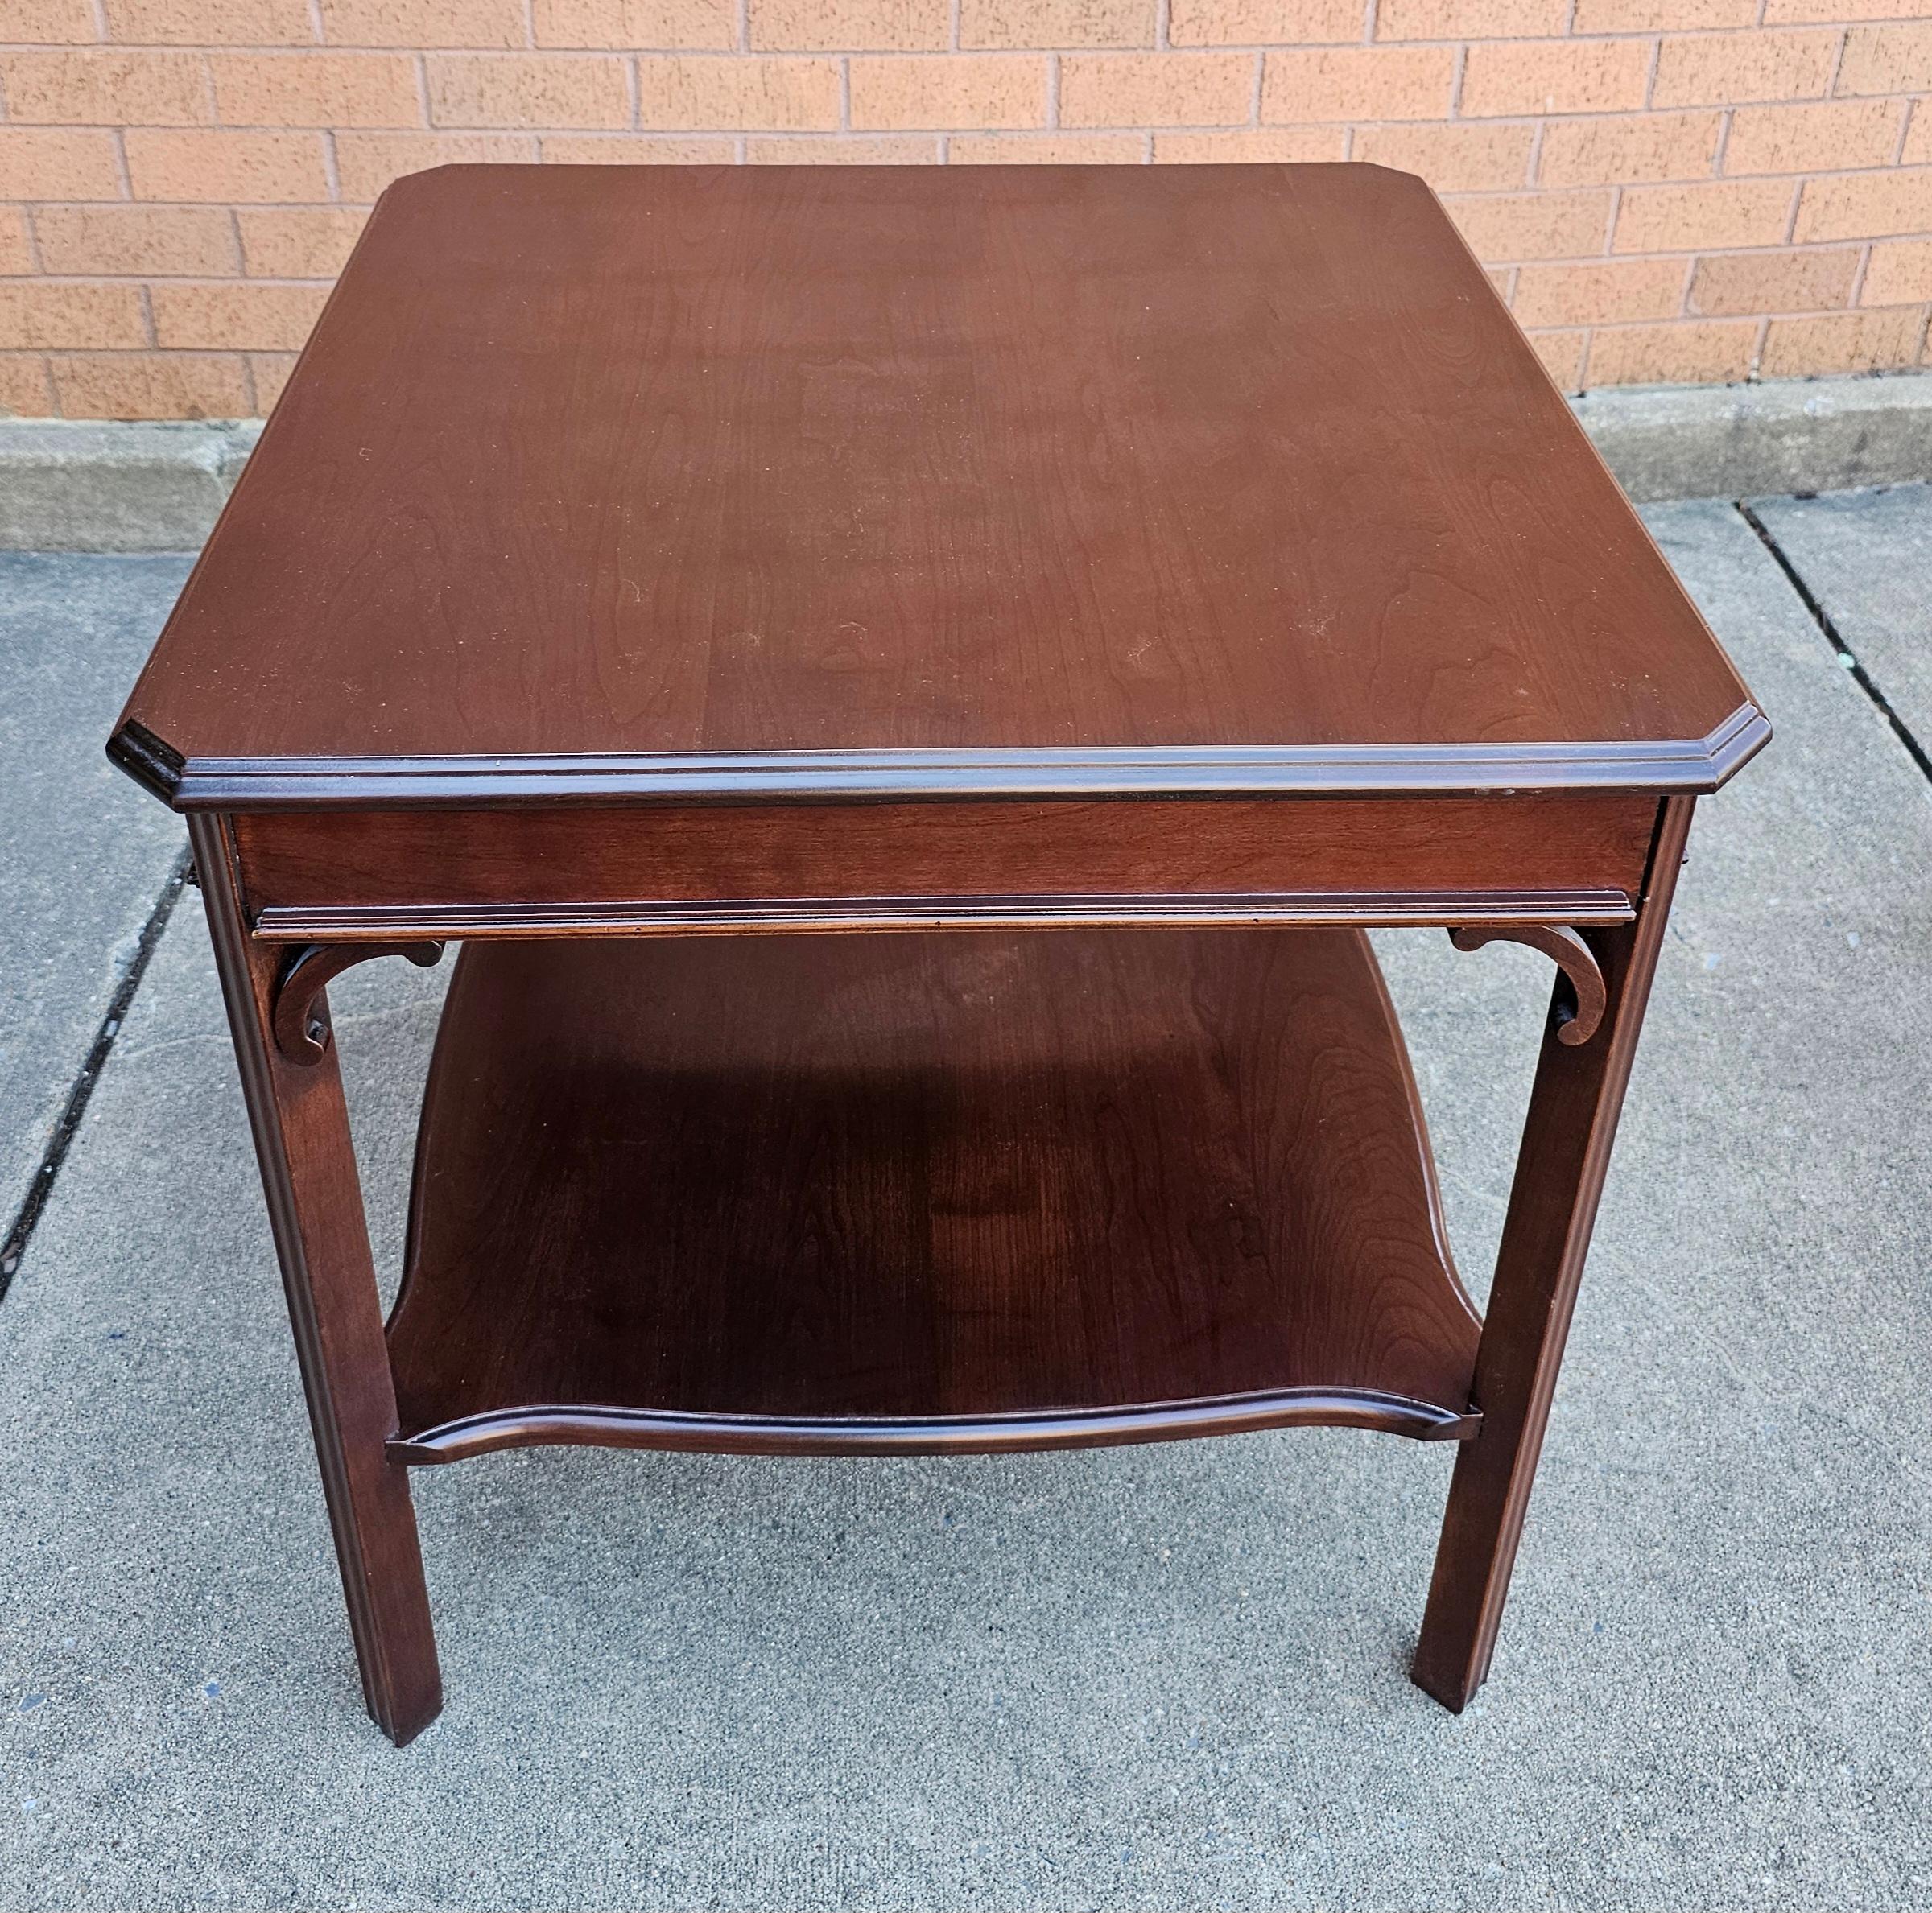 Harden Furniture Chippendale Solid Cherry Side Tables with Protective Glass Top In Excellent Condition For Sale In Germantown, MD